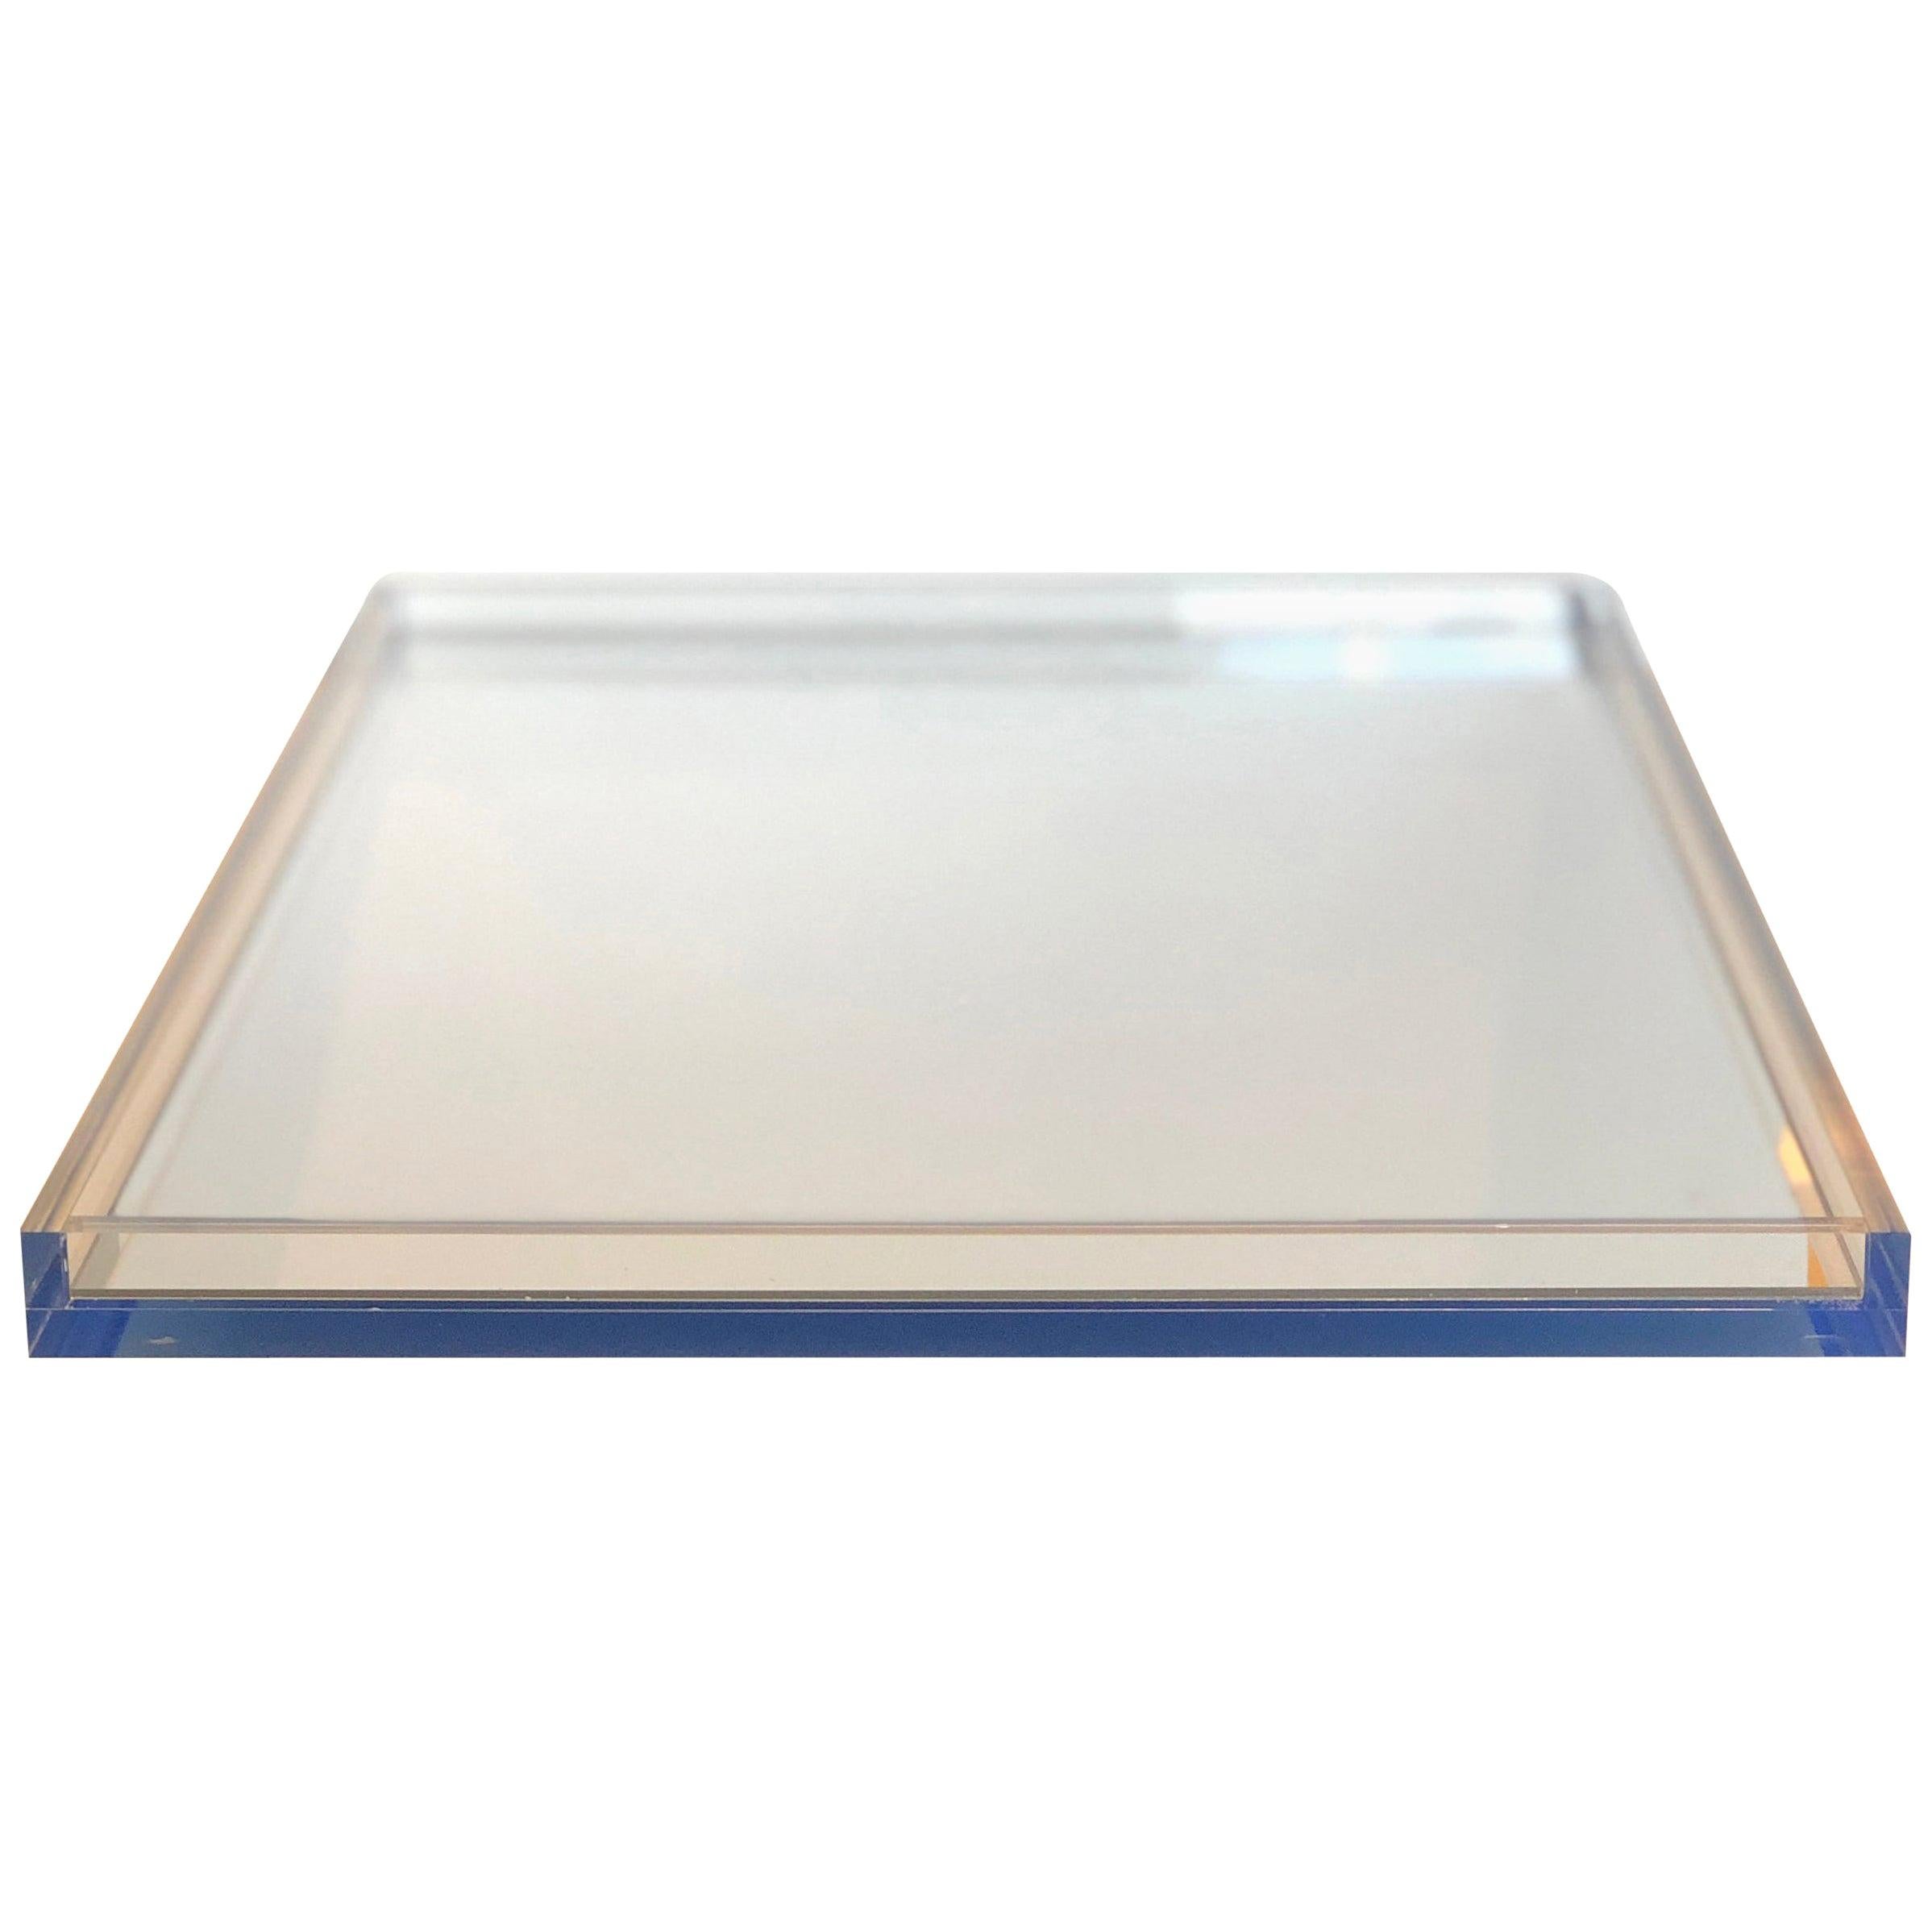 Clear Lucite with Imbedded Blue Border and Mirror Base Decorative Serving Tray